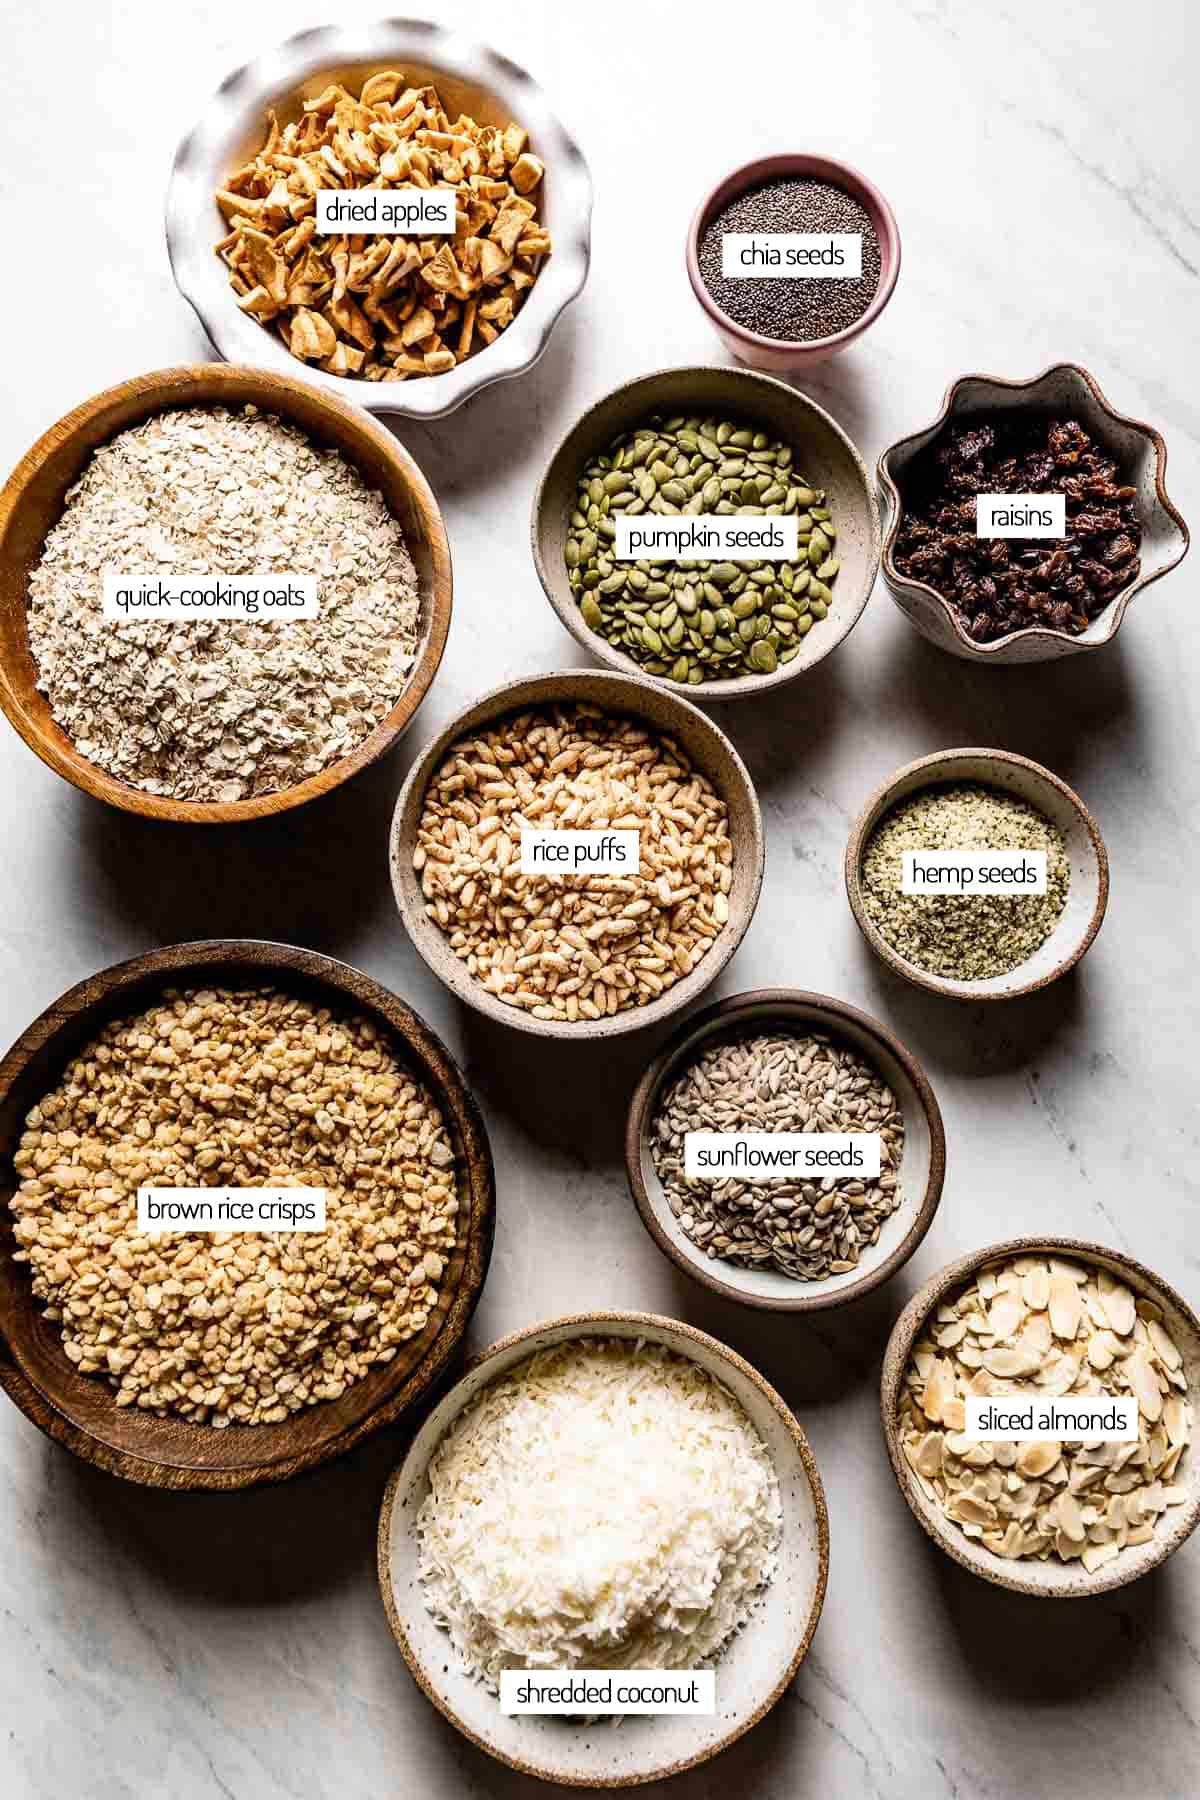 Ingredients for a homemade cereal in bowls from the top view.